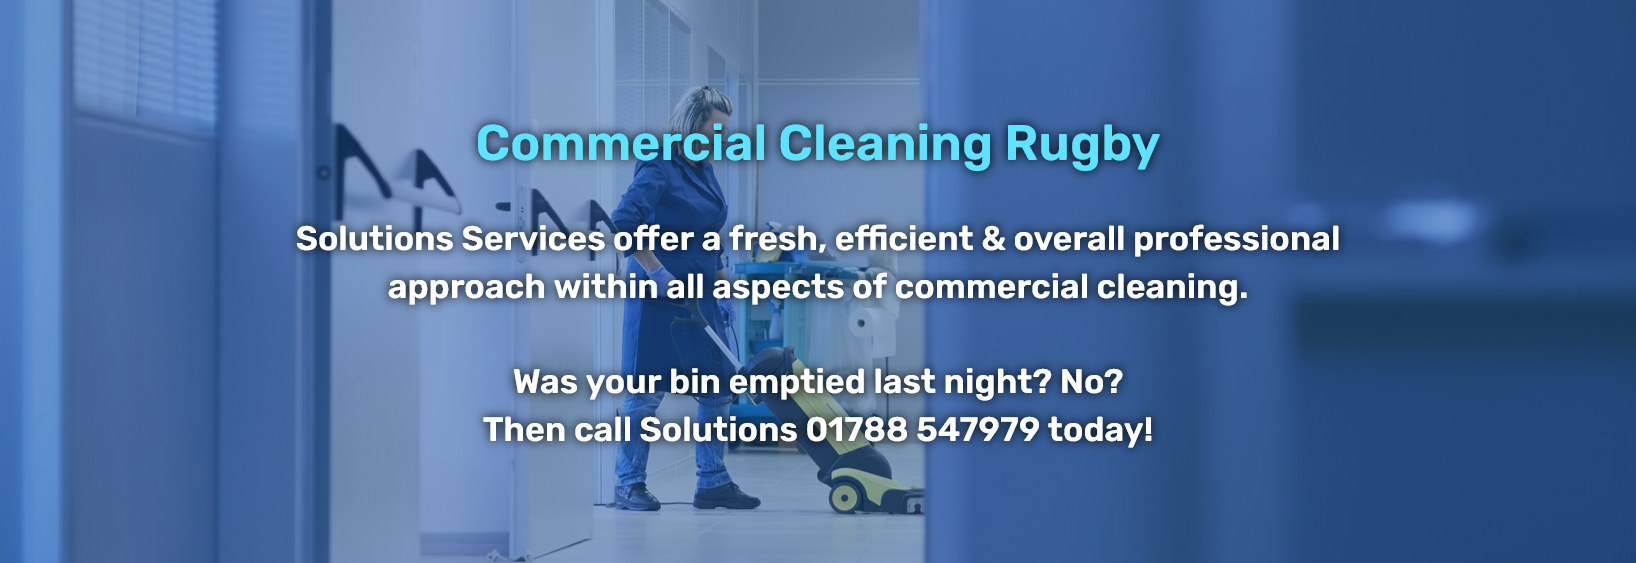 Commercial Cleaning in Rugby